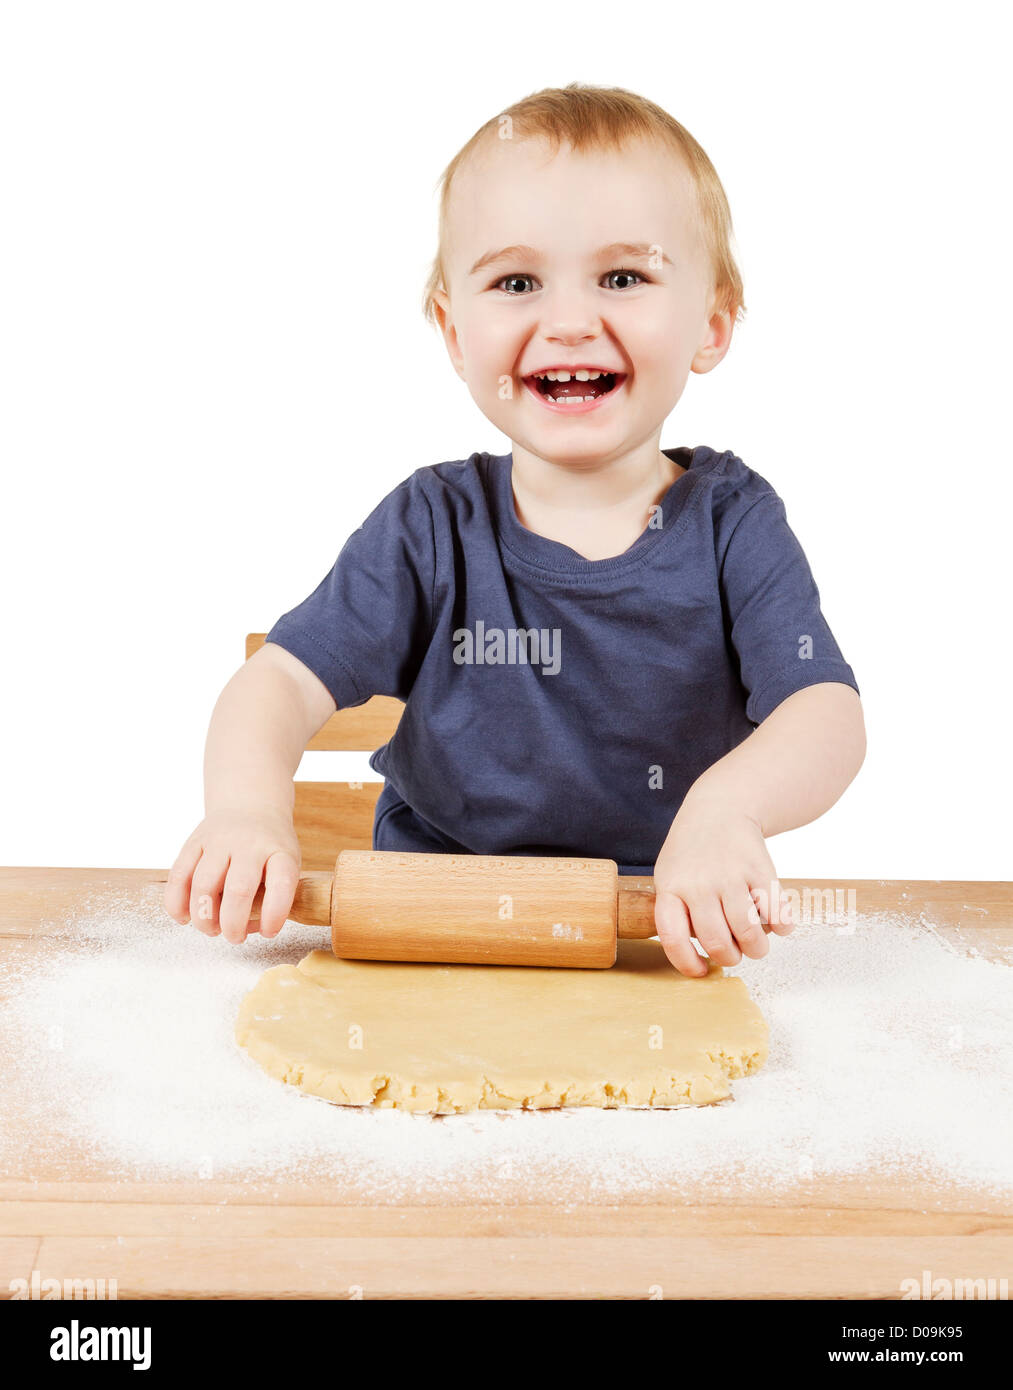 young child making cookies on small wooden desk Stock Photo